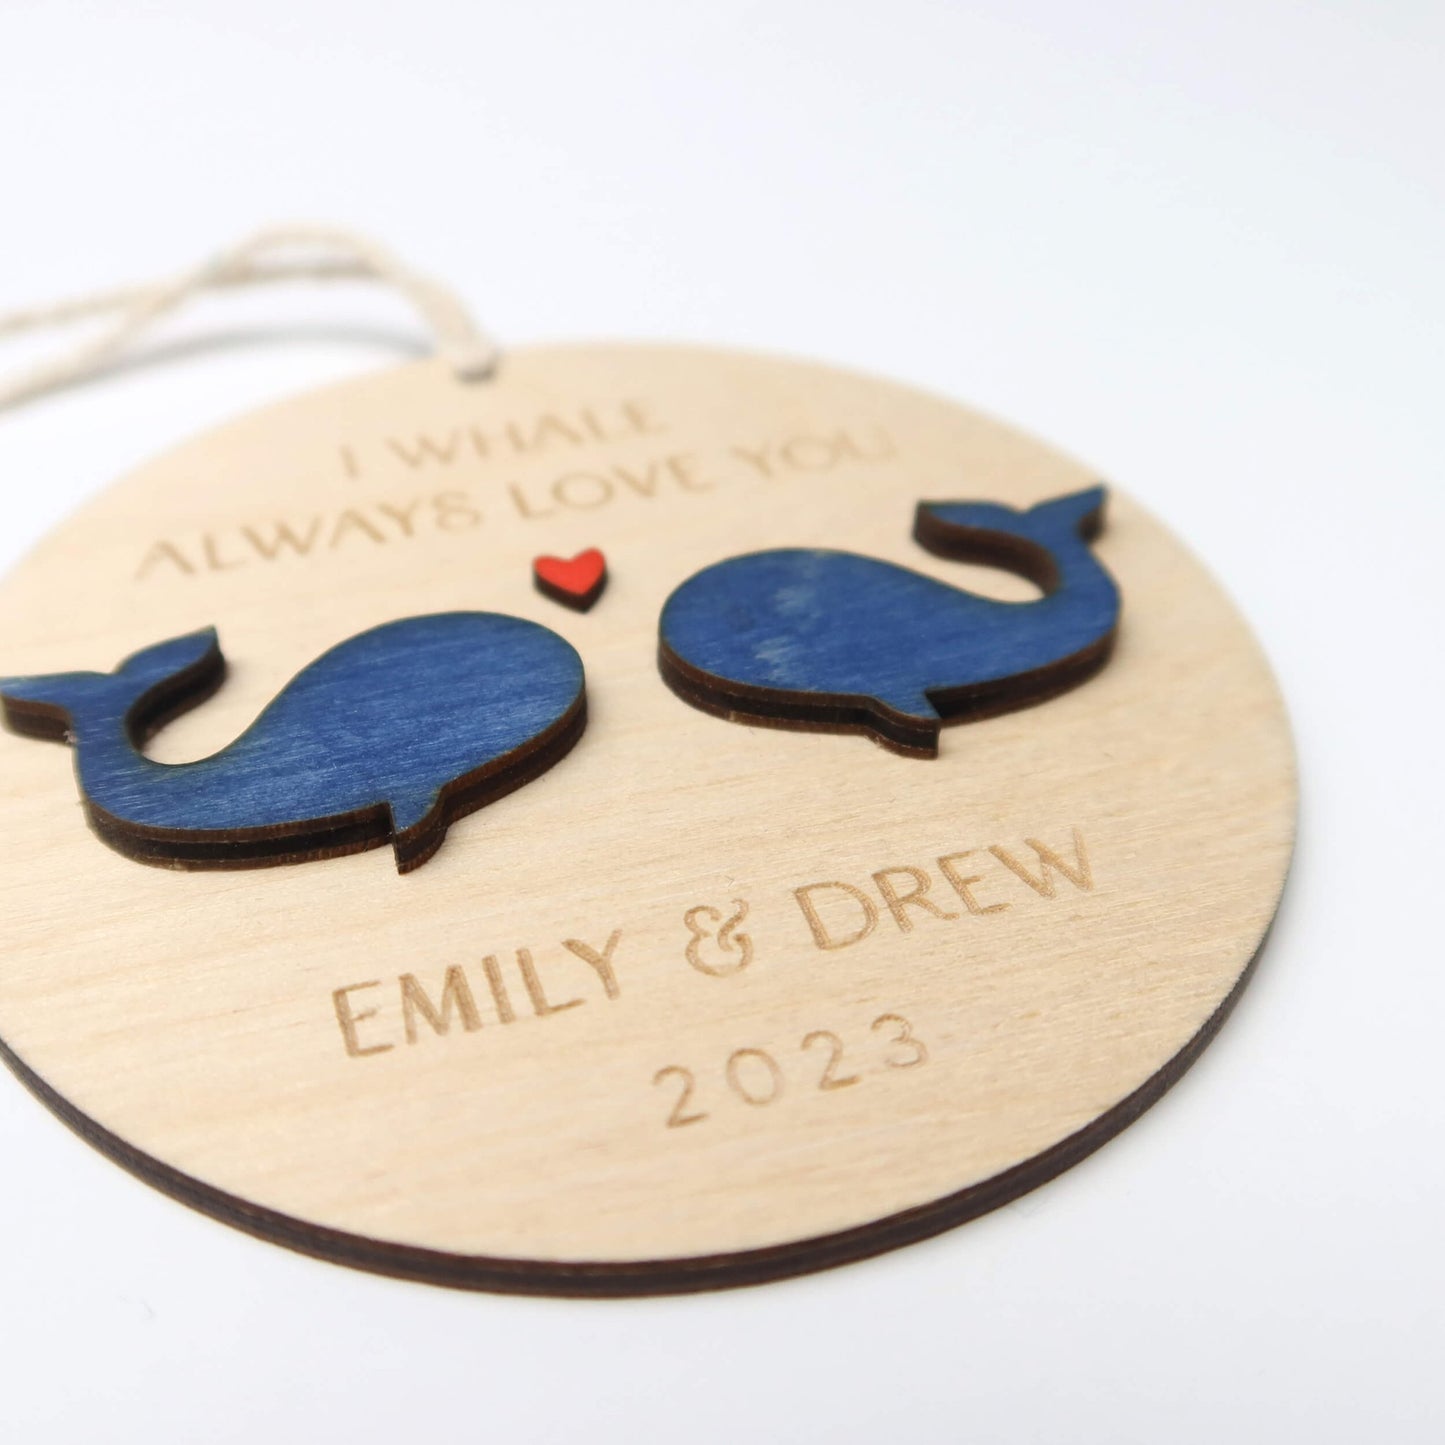 Whales Personalized Couple Ornament - Holiday Ornaments - Moon Rock Prints